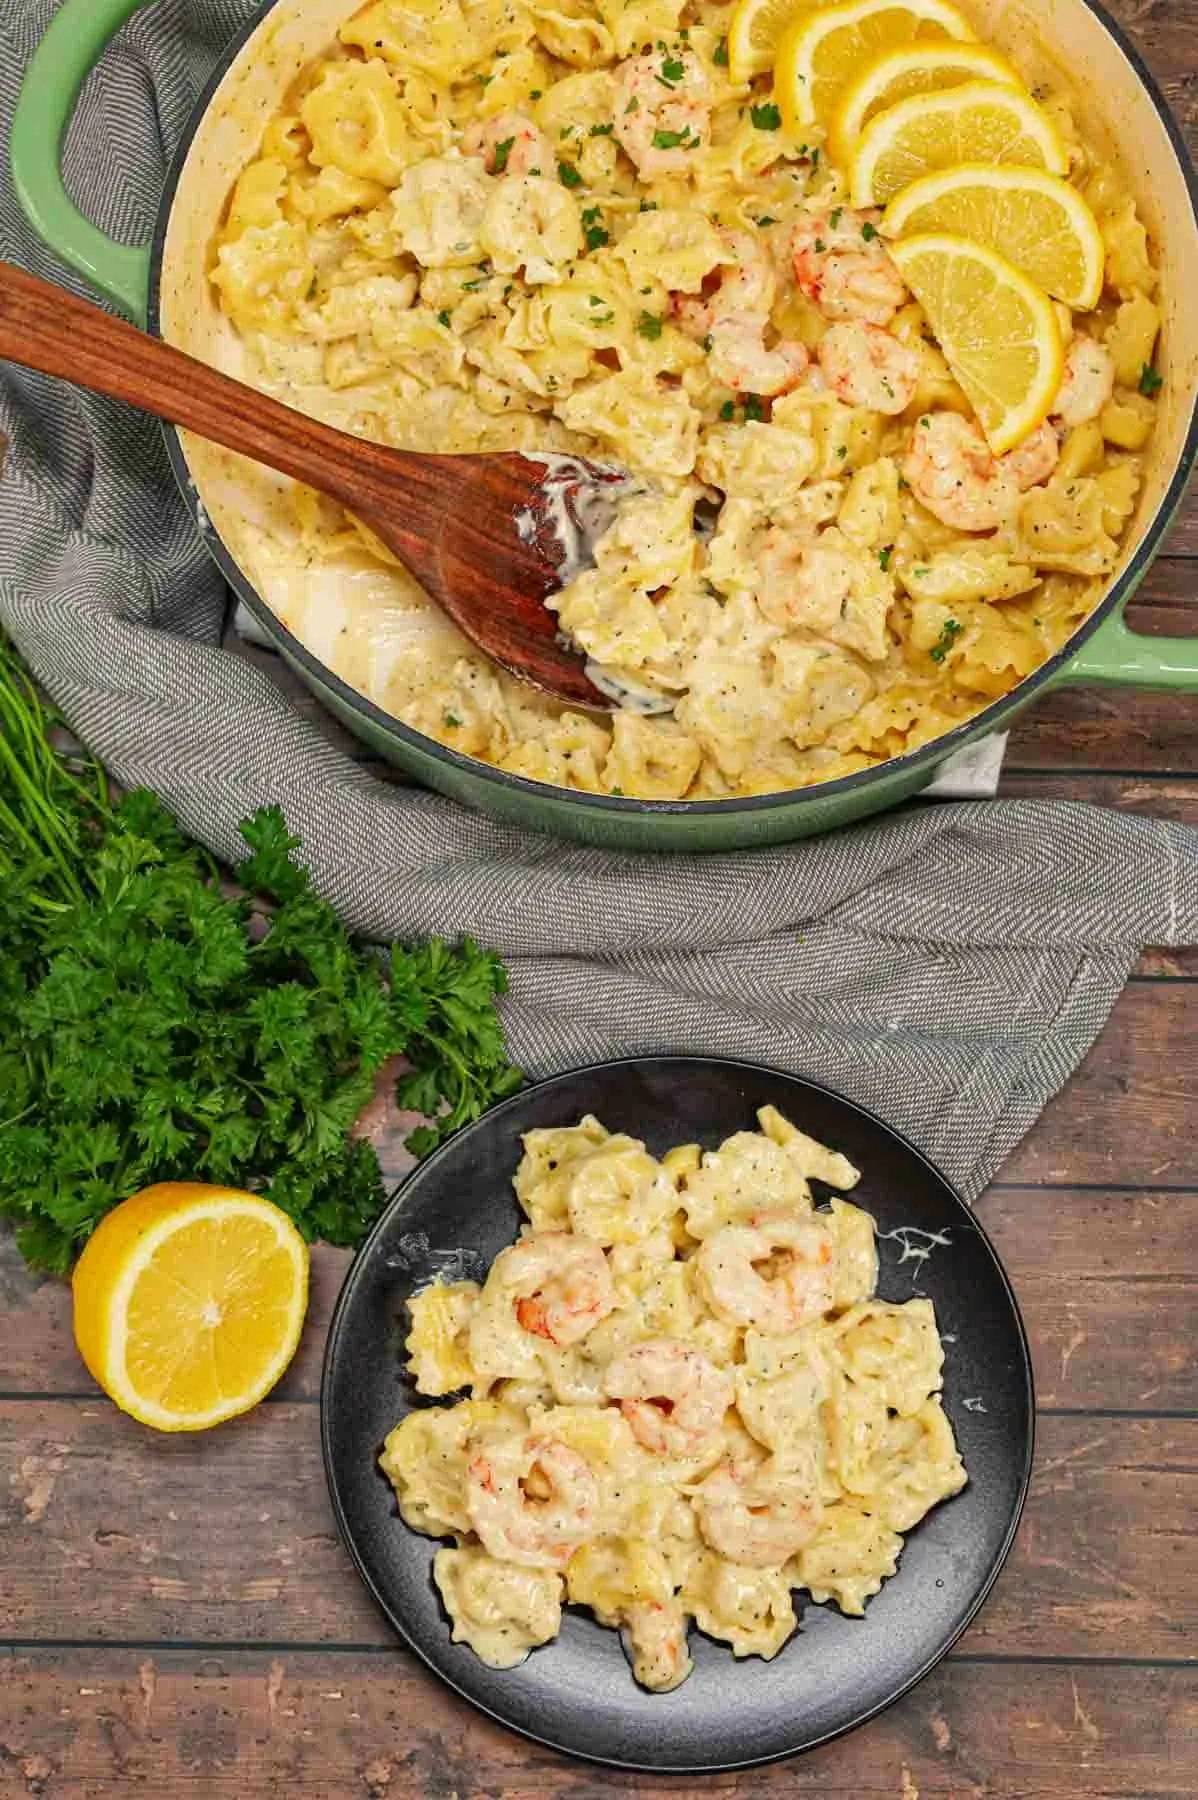 Shrimp Tortellini Alfredo is a delicious seafood pasta recipe with cheese tortellini and tender shrimp all tossed in a creamy garlic parmesan sauce.